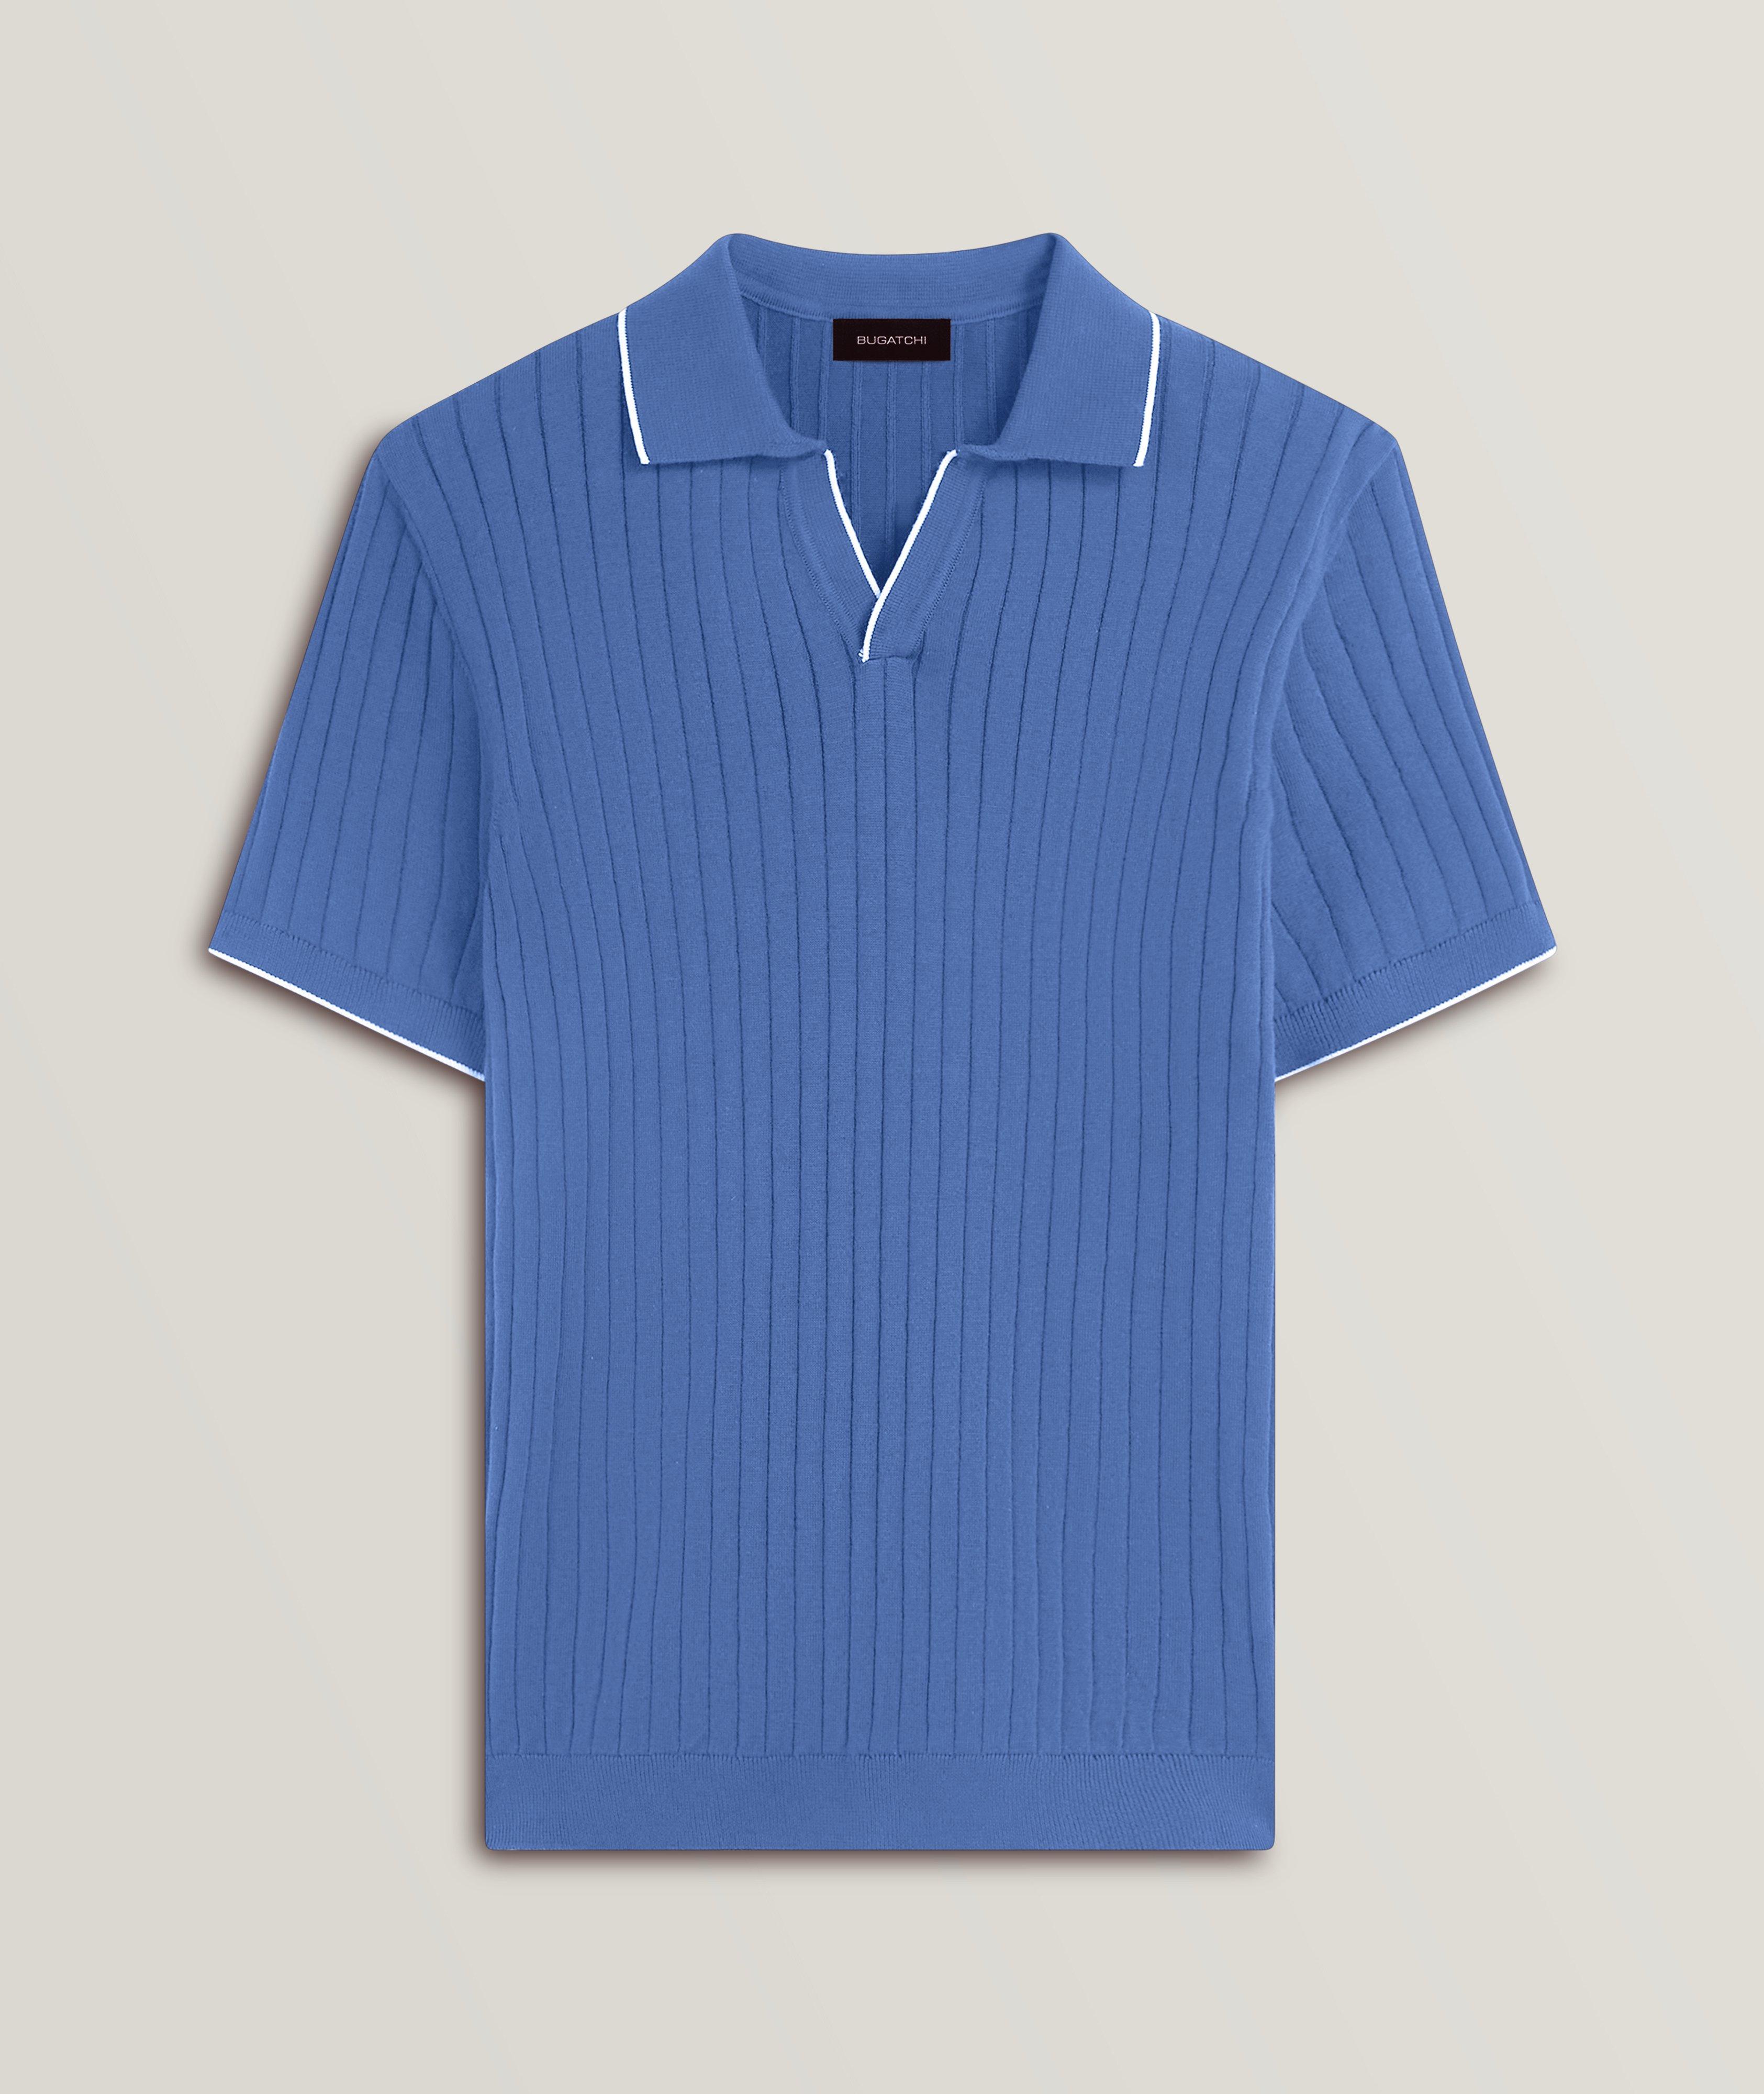 Ribbed Knit Cotton-Blend Polo image 0